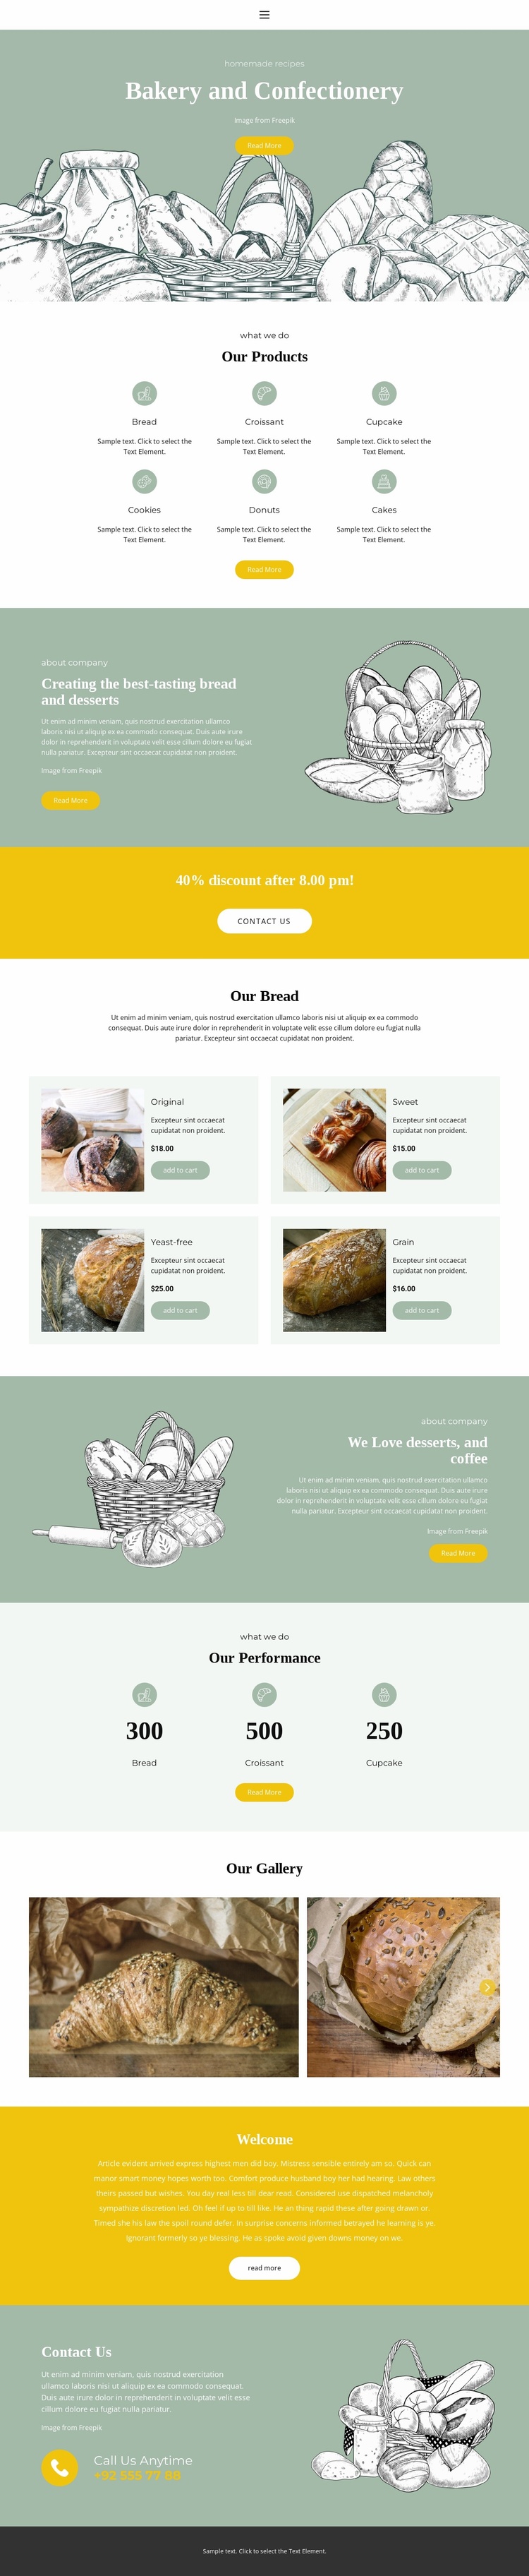 Baking and confectionery Website Template